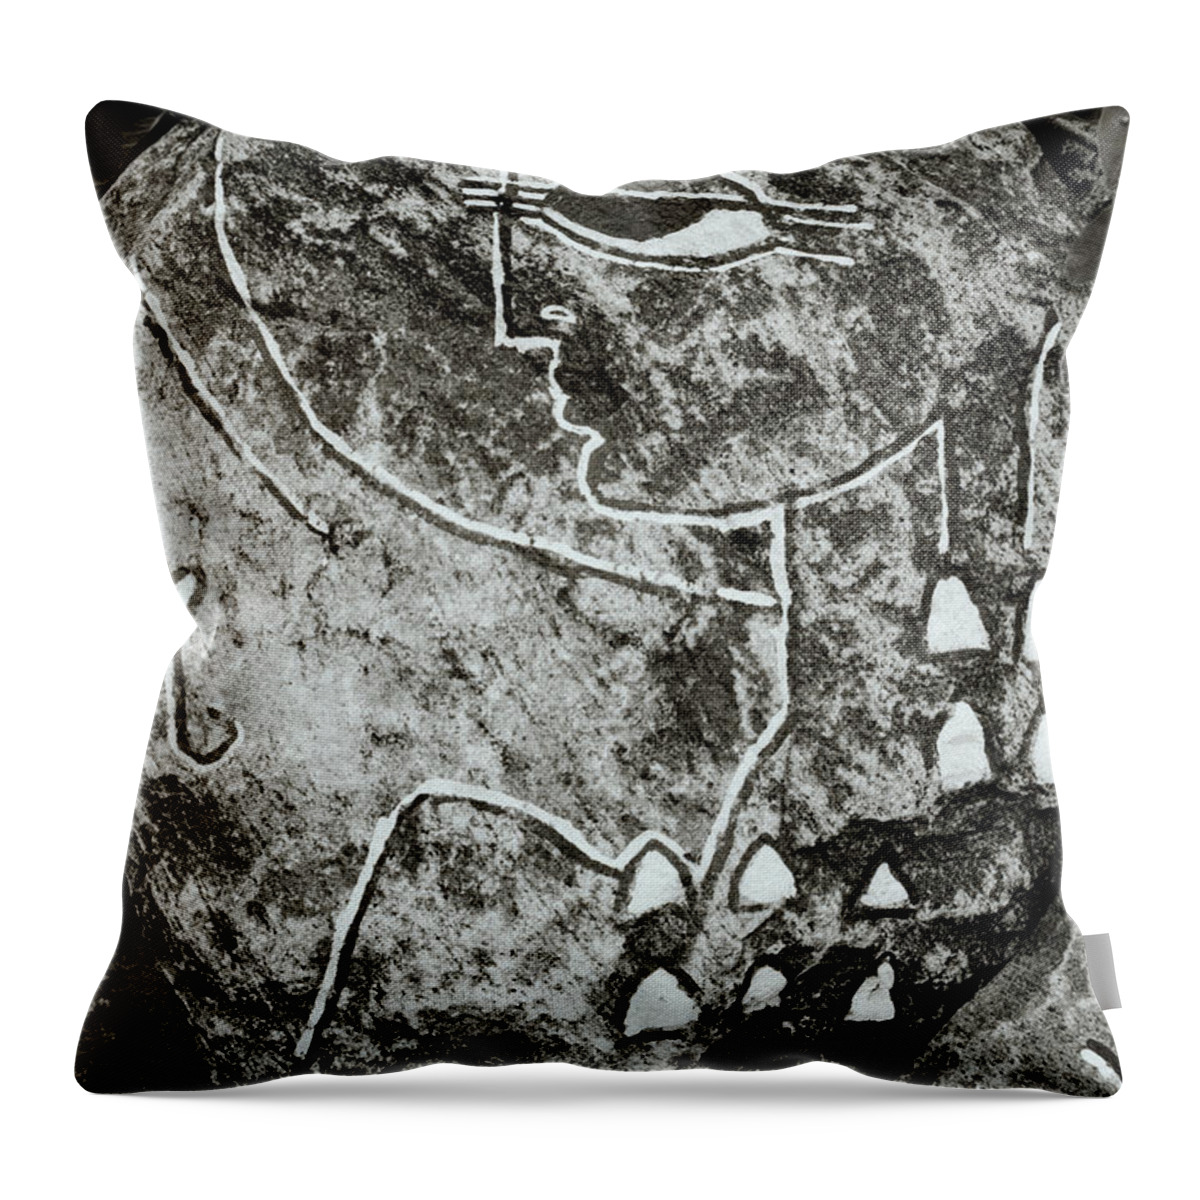 Cubist Throw Pillow featuring the photograph Surreal Lady by Shaun Higson